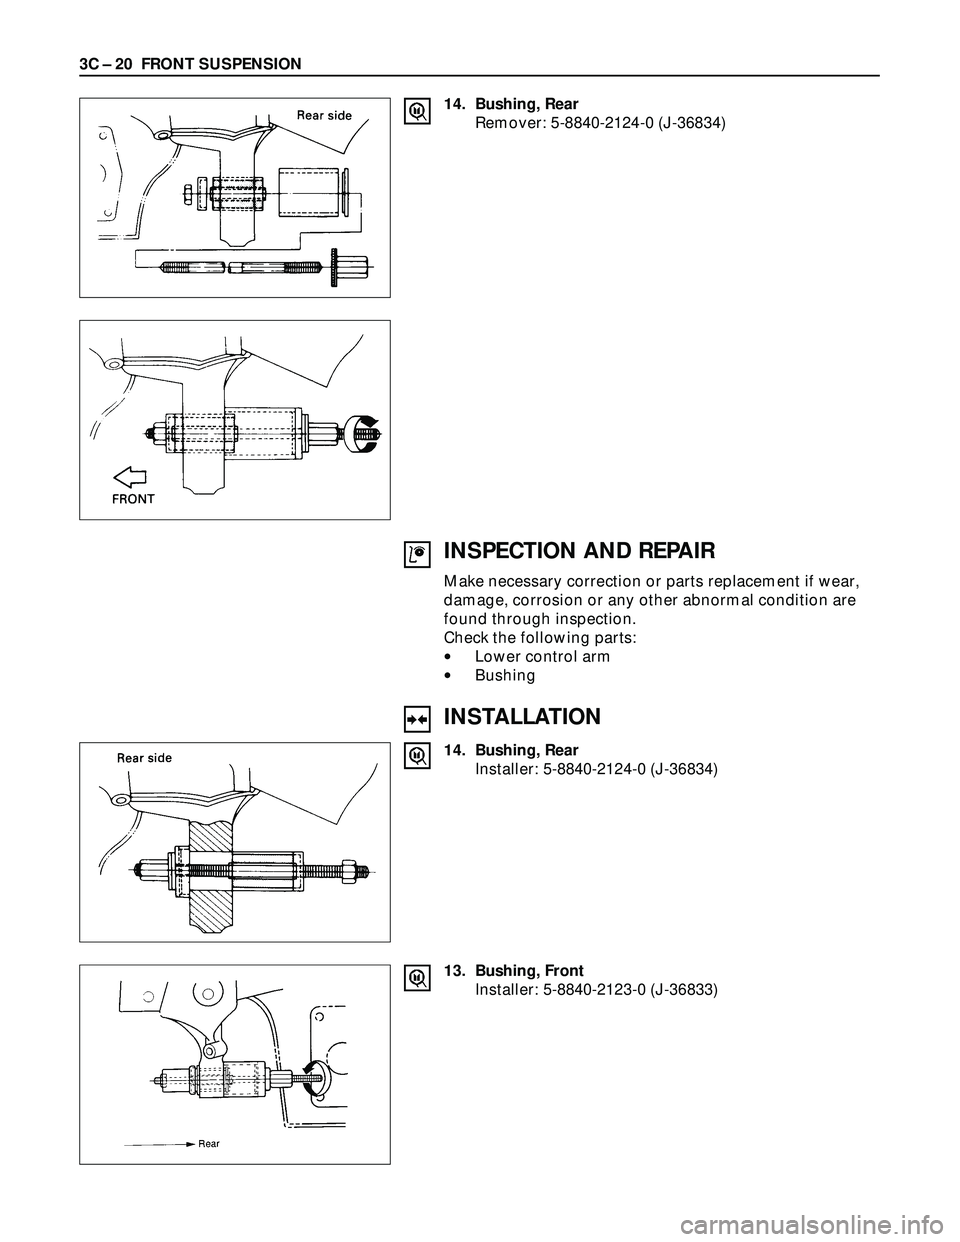 ISUZU TROOPER 1998  Service Repair Manual 3C – 20 FRONT SUSPENSION
14. Bushing, Rear
Remover: 5-8840-2124-0 (J-36834)
INSPECTION AND REPAIR
Make necessary correction or parts replacement if wear,
damage, corrosion or any other abnormal cond